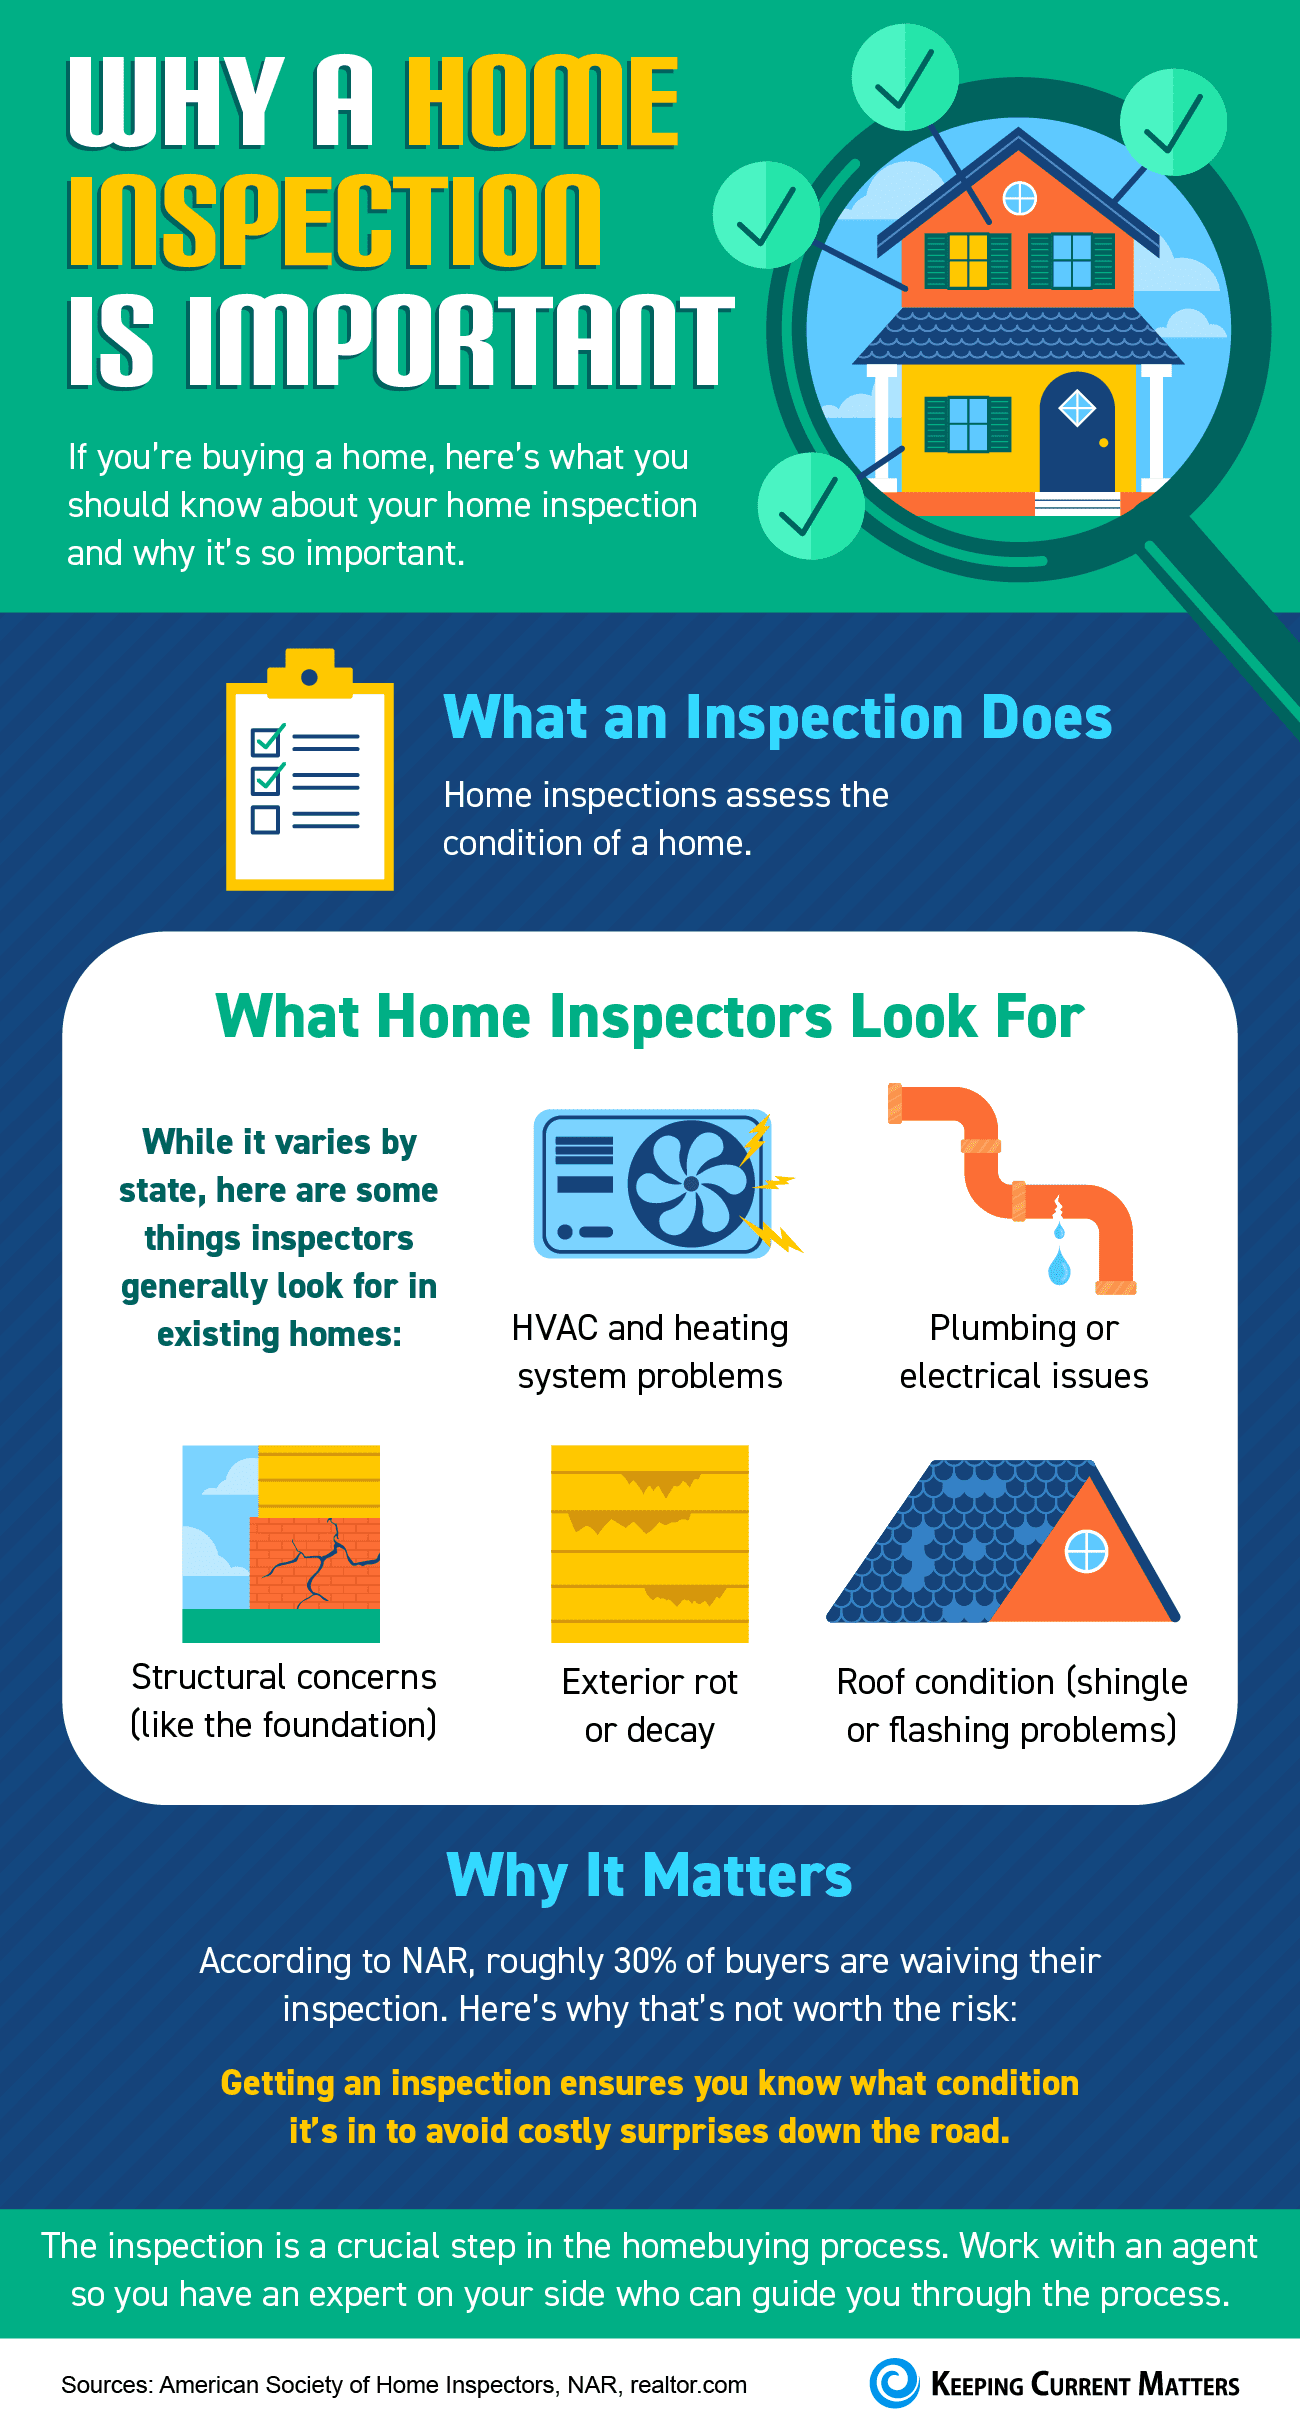 Why a Home Inspection is Important